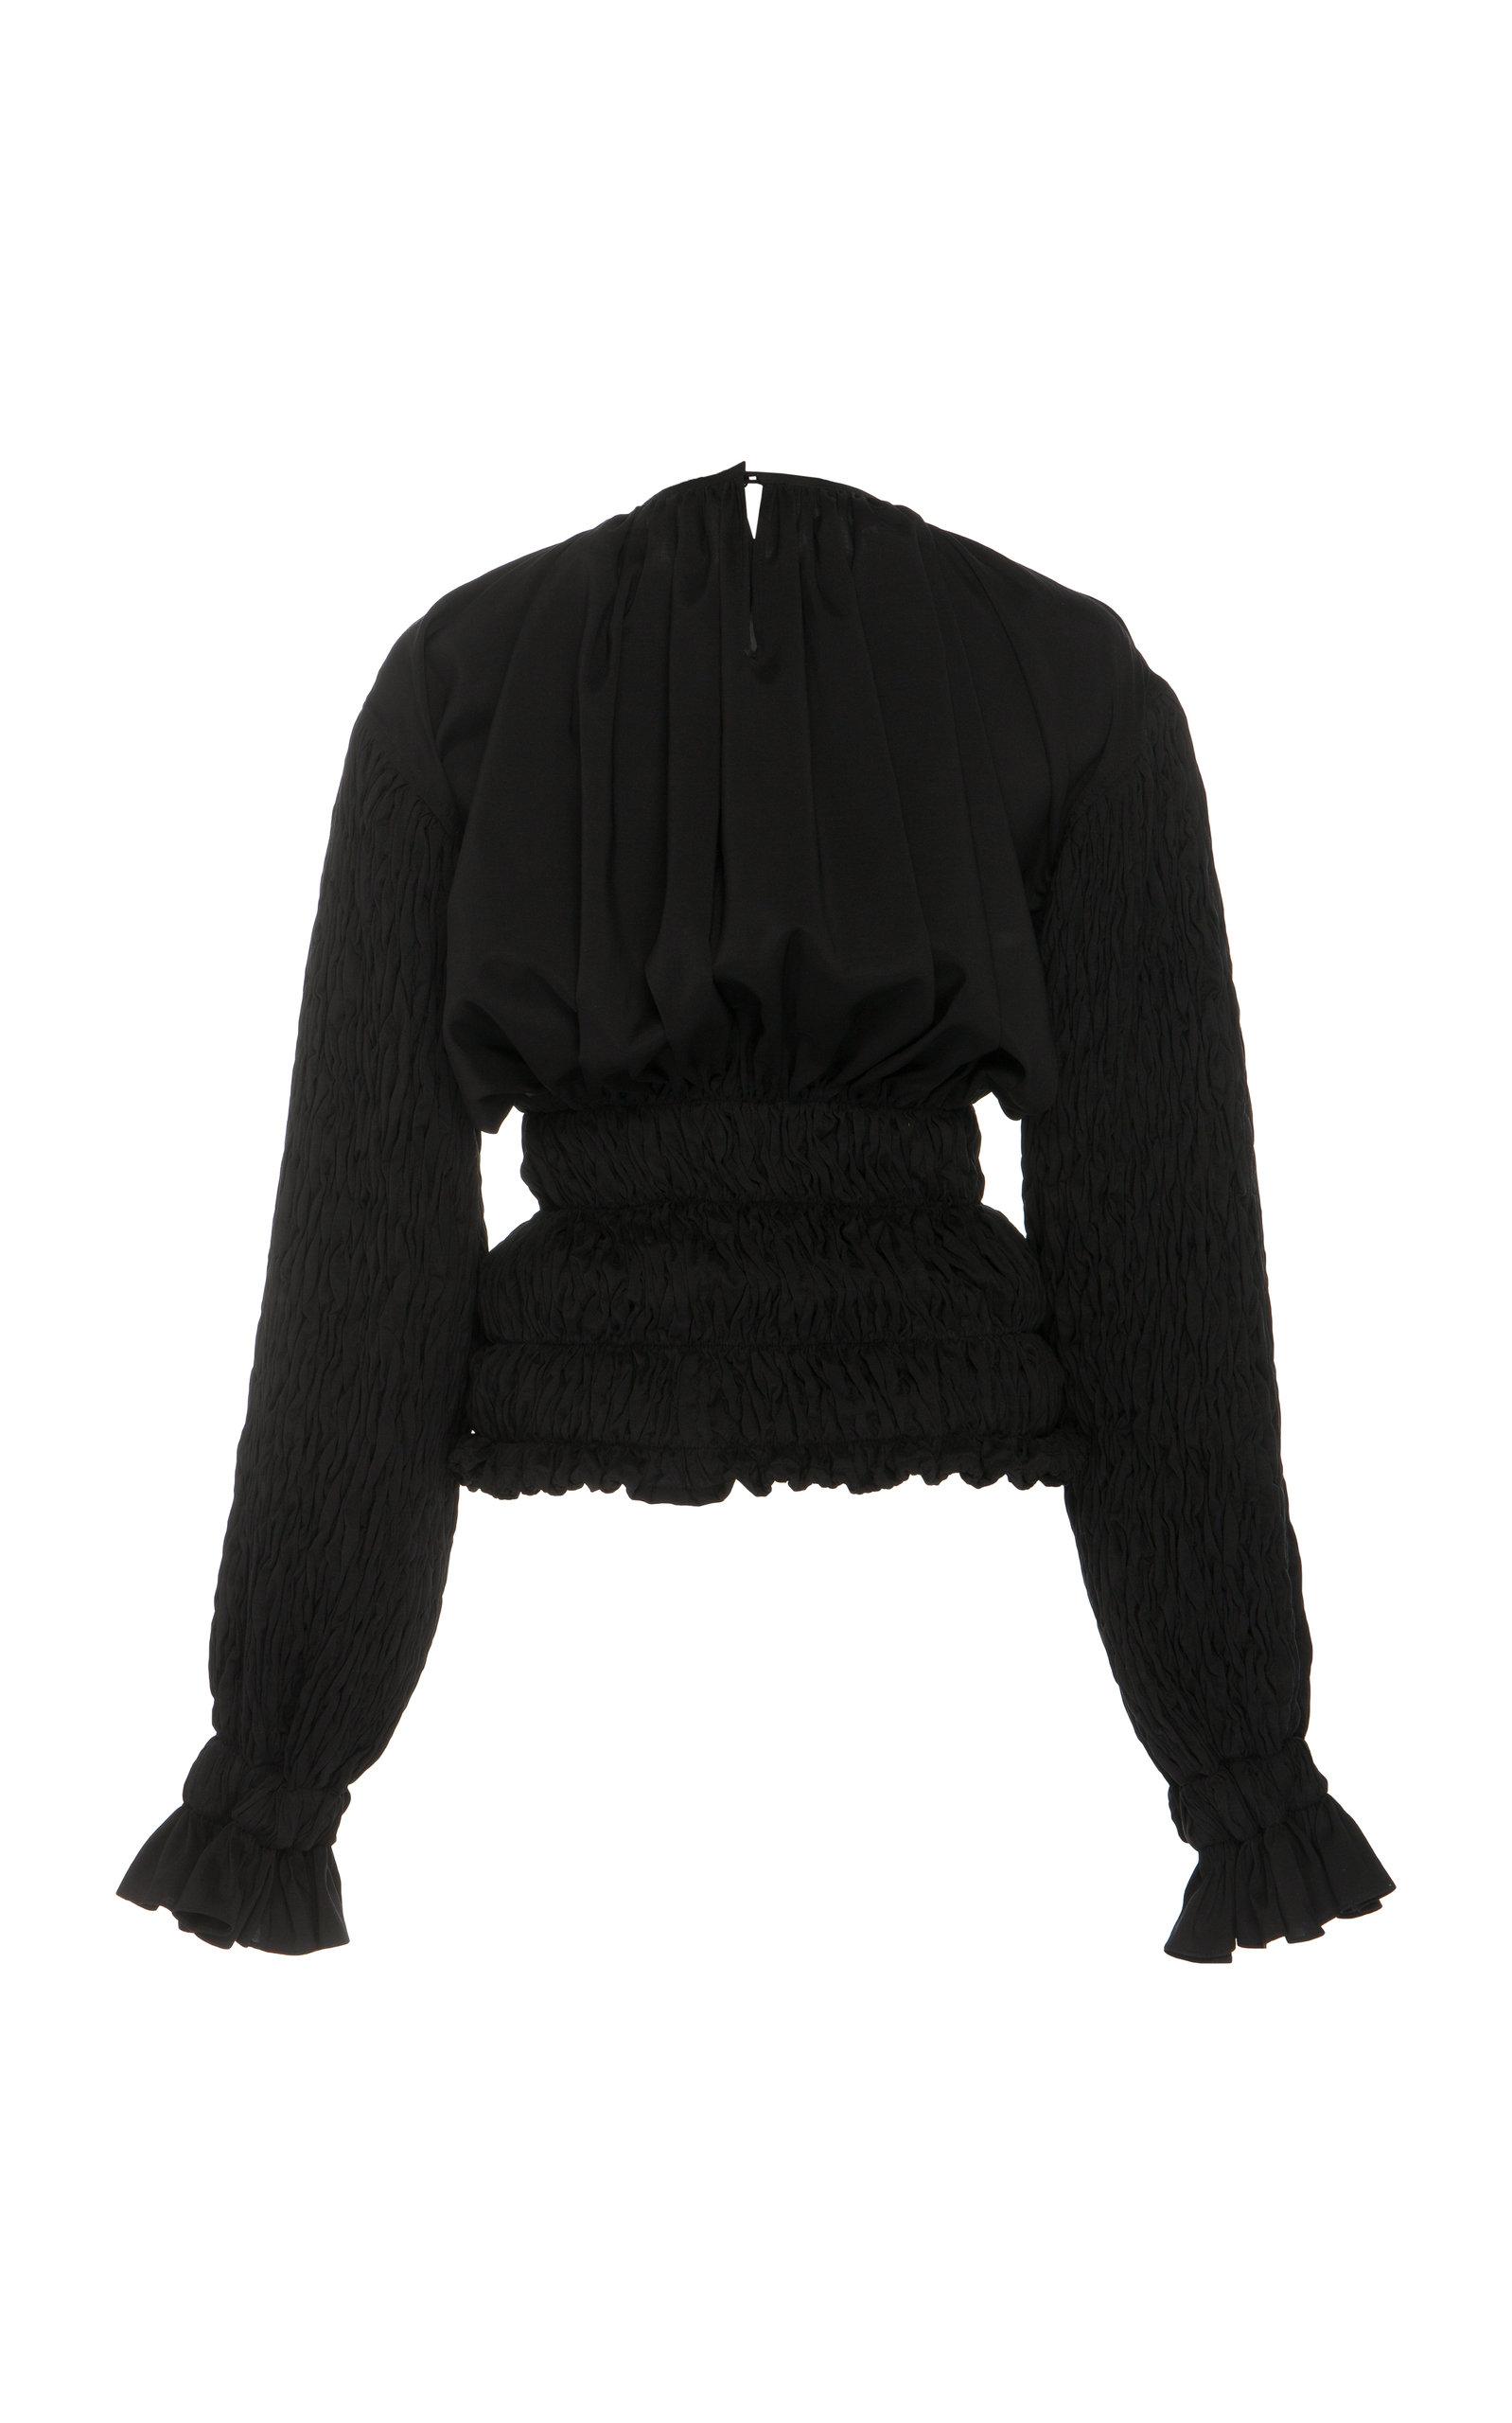 Lemaire Silk-blend Long Sleeve Crew Smock Top in Black - Lyst